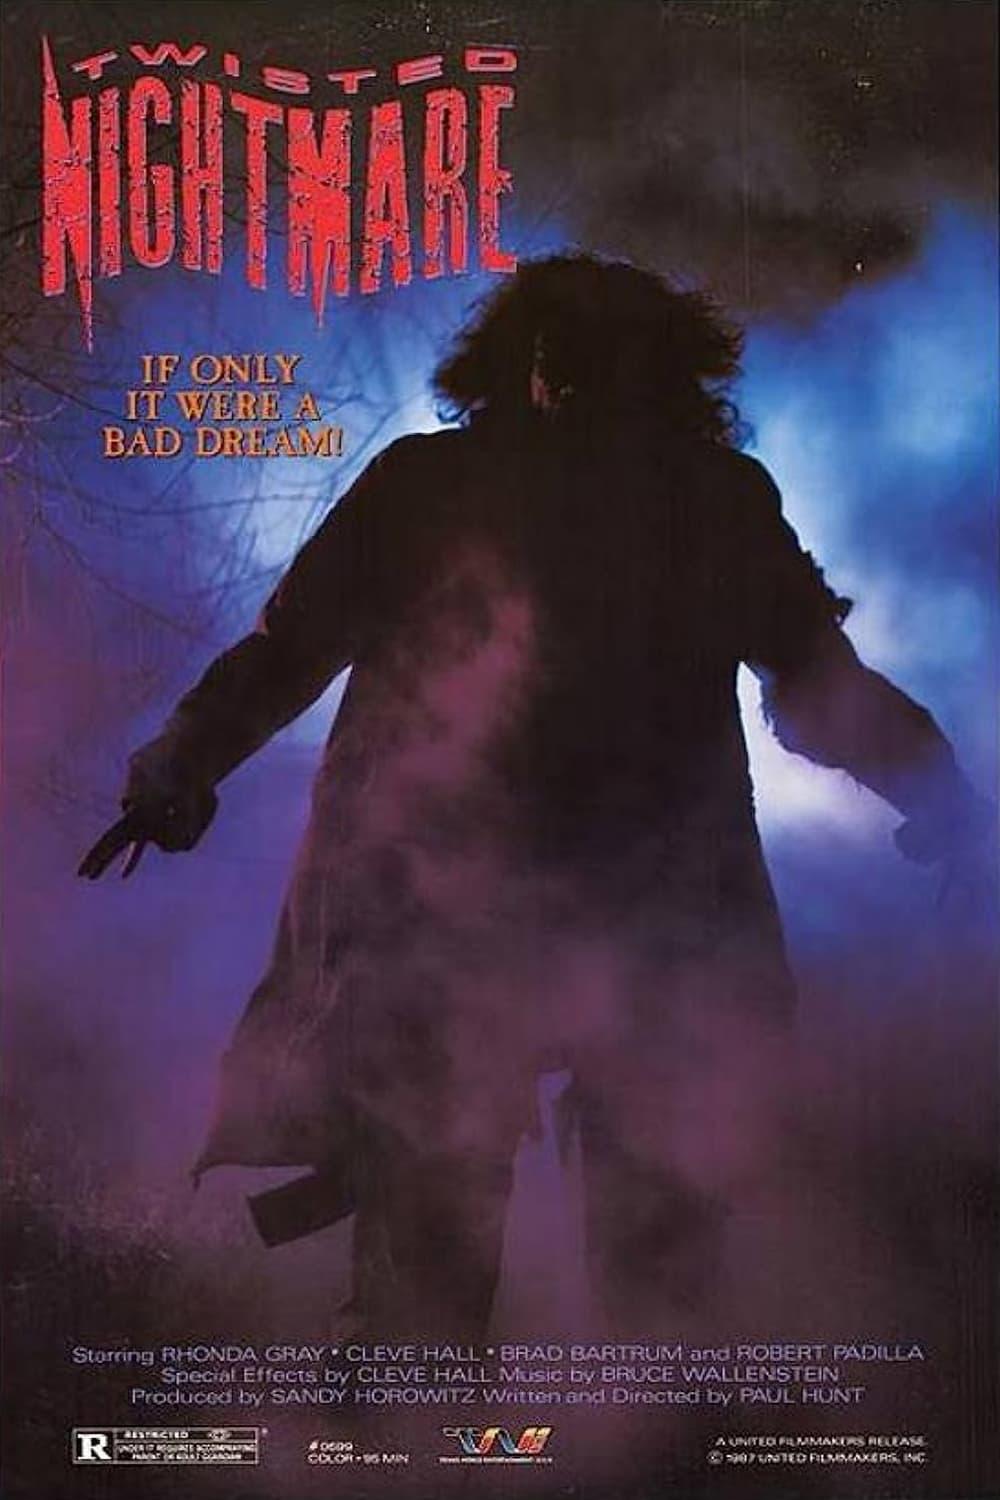 Twisted Nightmare poster